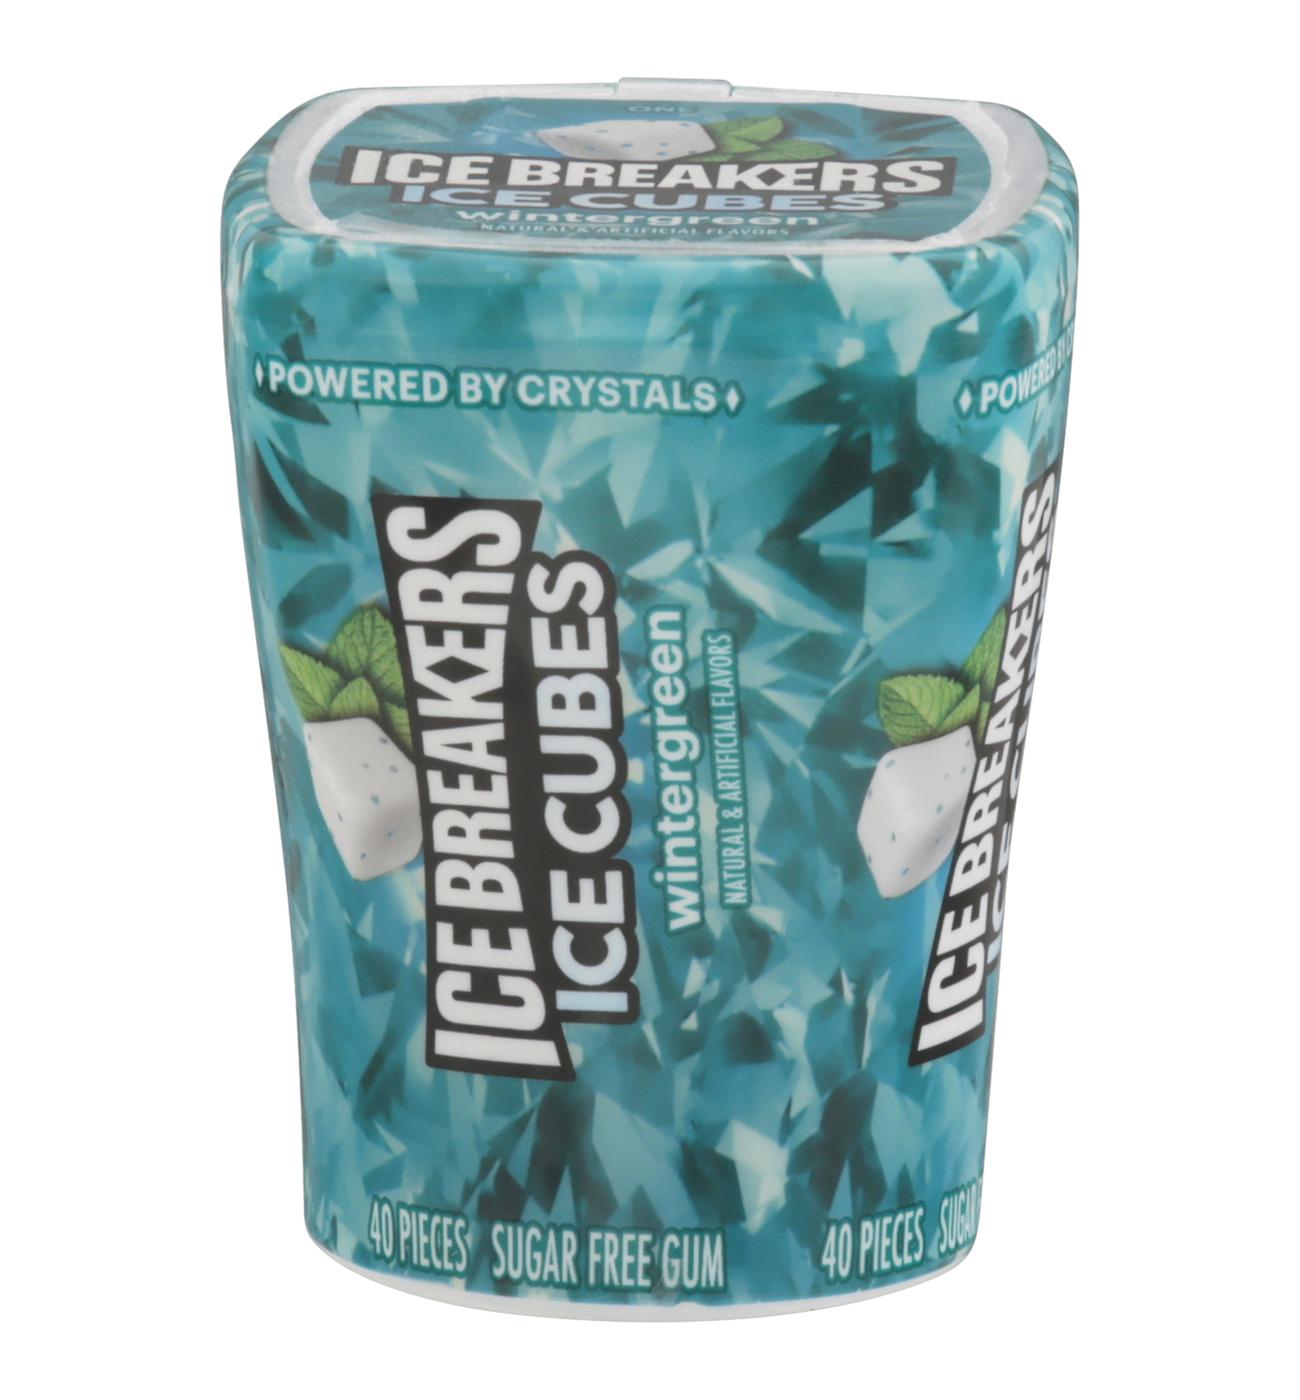 Ice Breakers Ice Cubes Wintergreen Sugar Free Chewing Gum; image 1 of 2